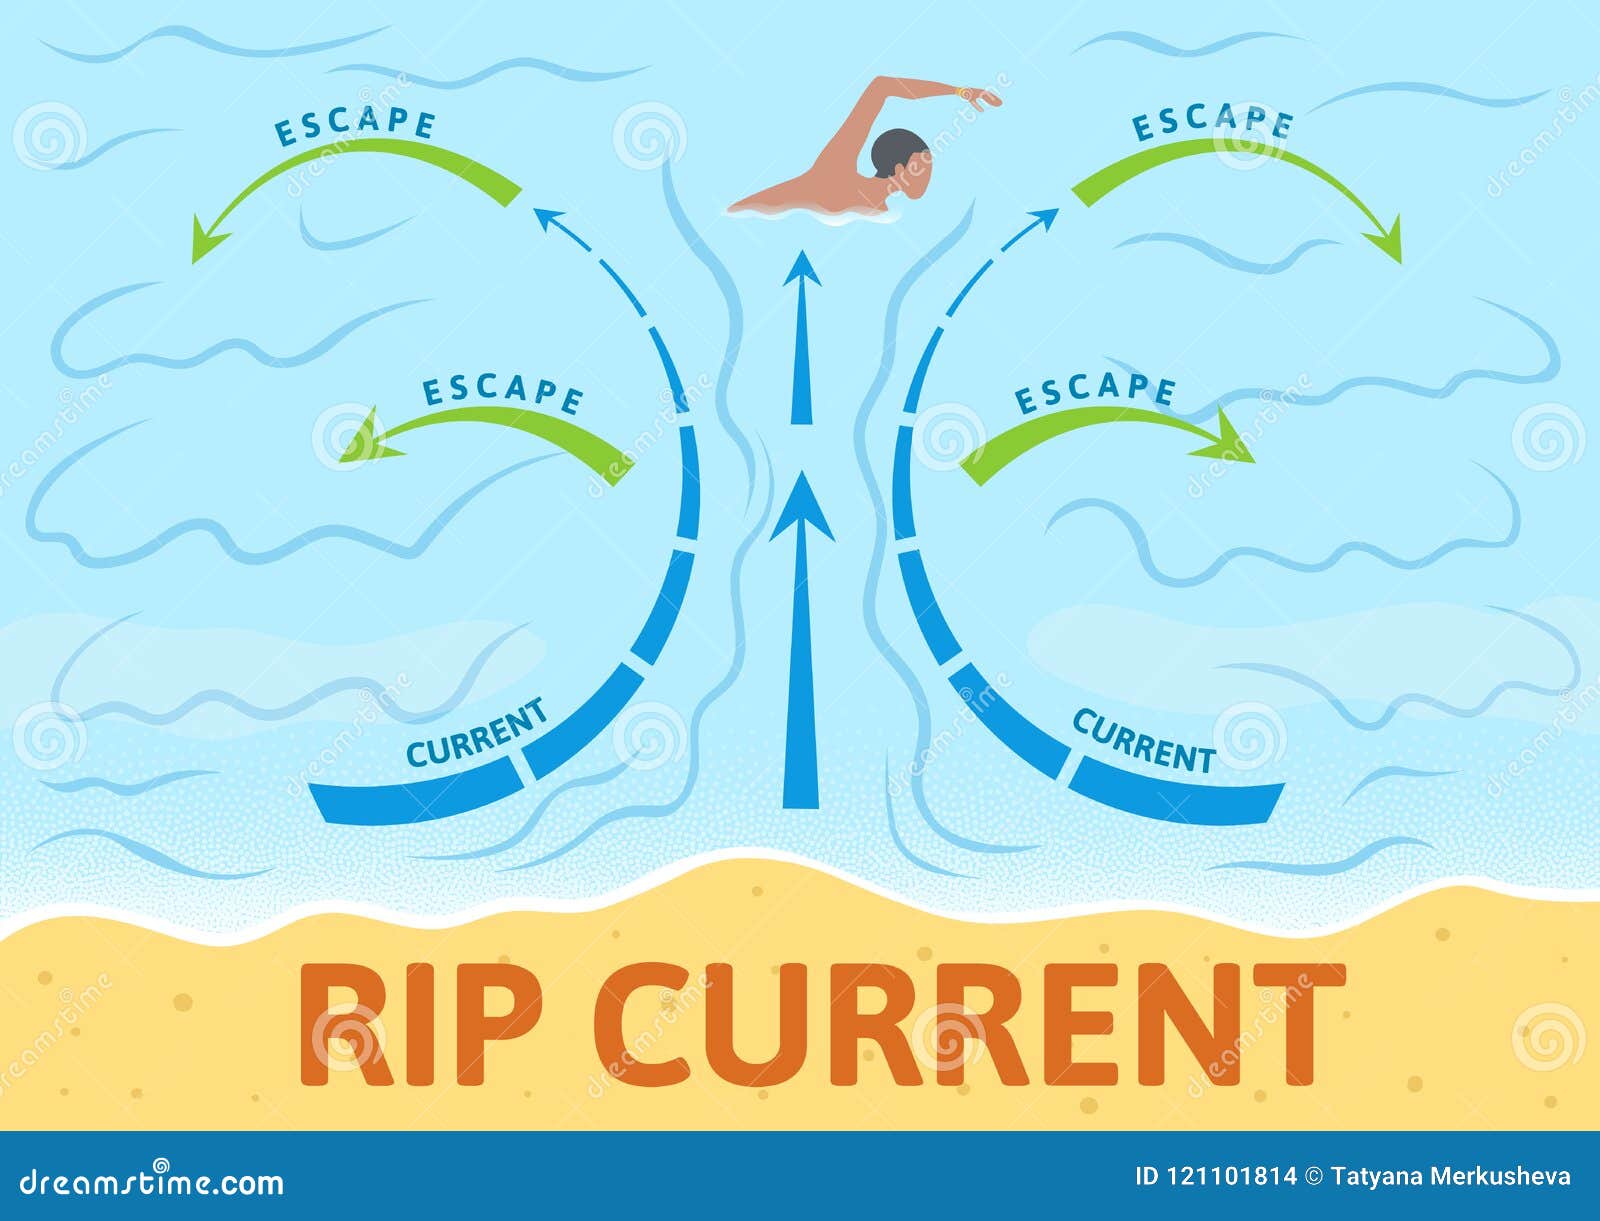 how to escape rip current. instruction board with scheme and arrows, sign. colorful flat  . horizontal